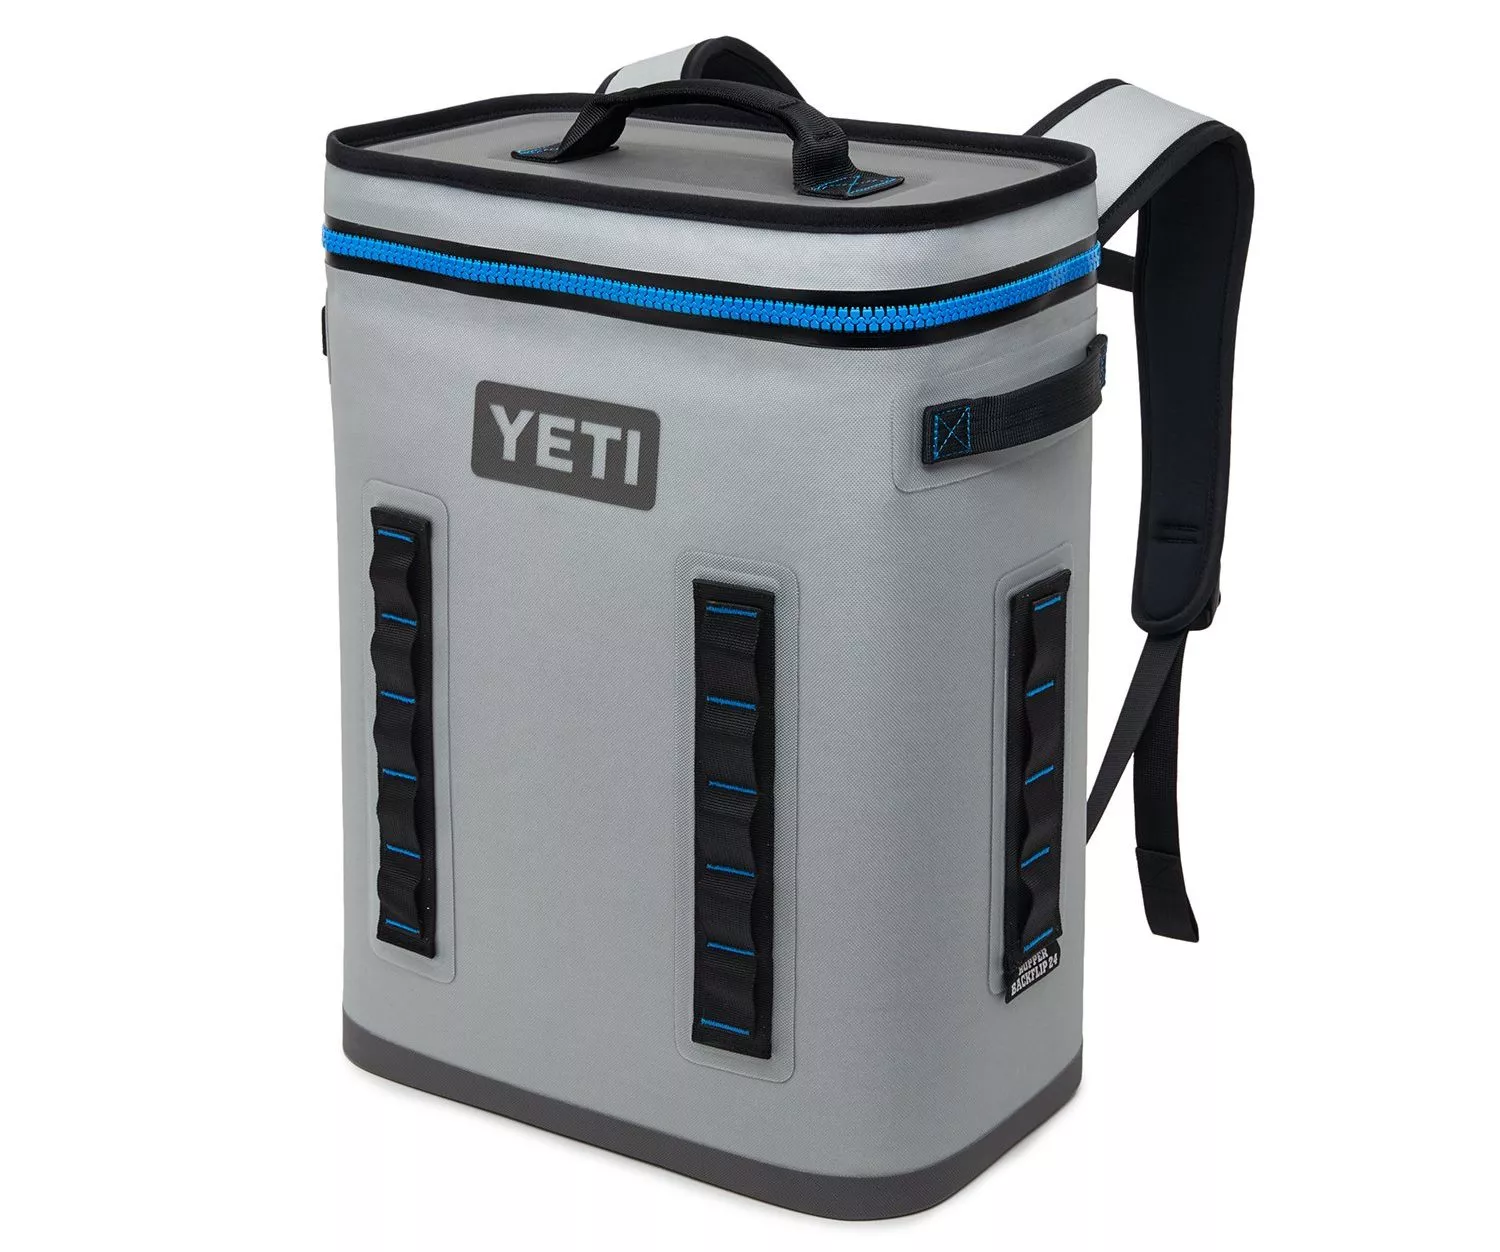 Best Gifts For Uncle 2023: YETI Backpack Cooler 2023